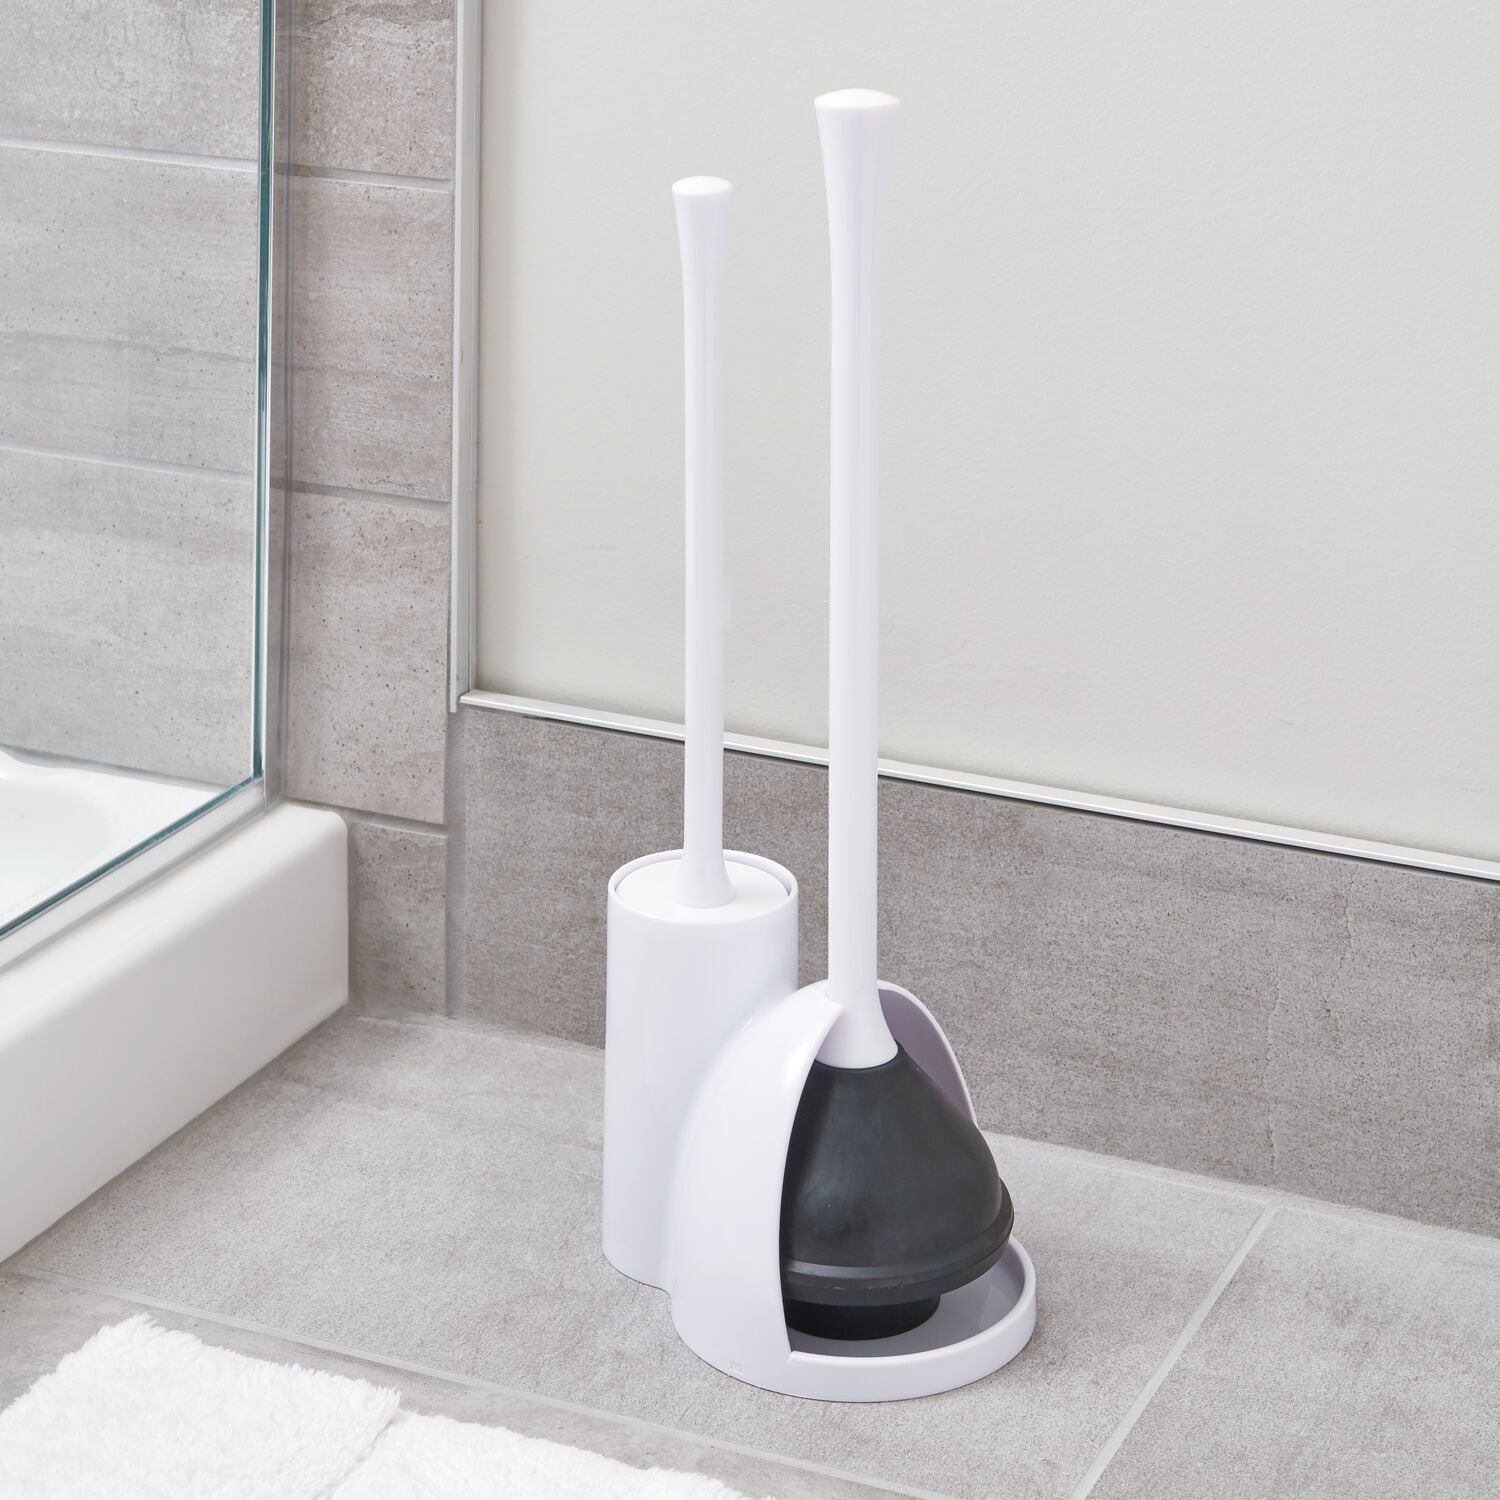 Beldray Square Toilet Brush Keep your toilet bowl clean and sparkling 